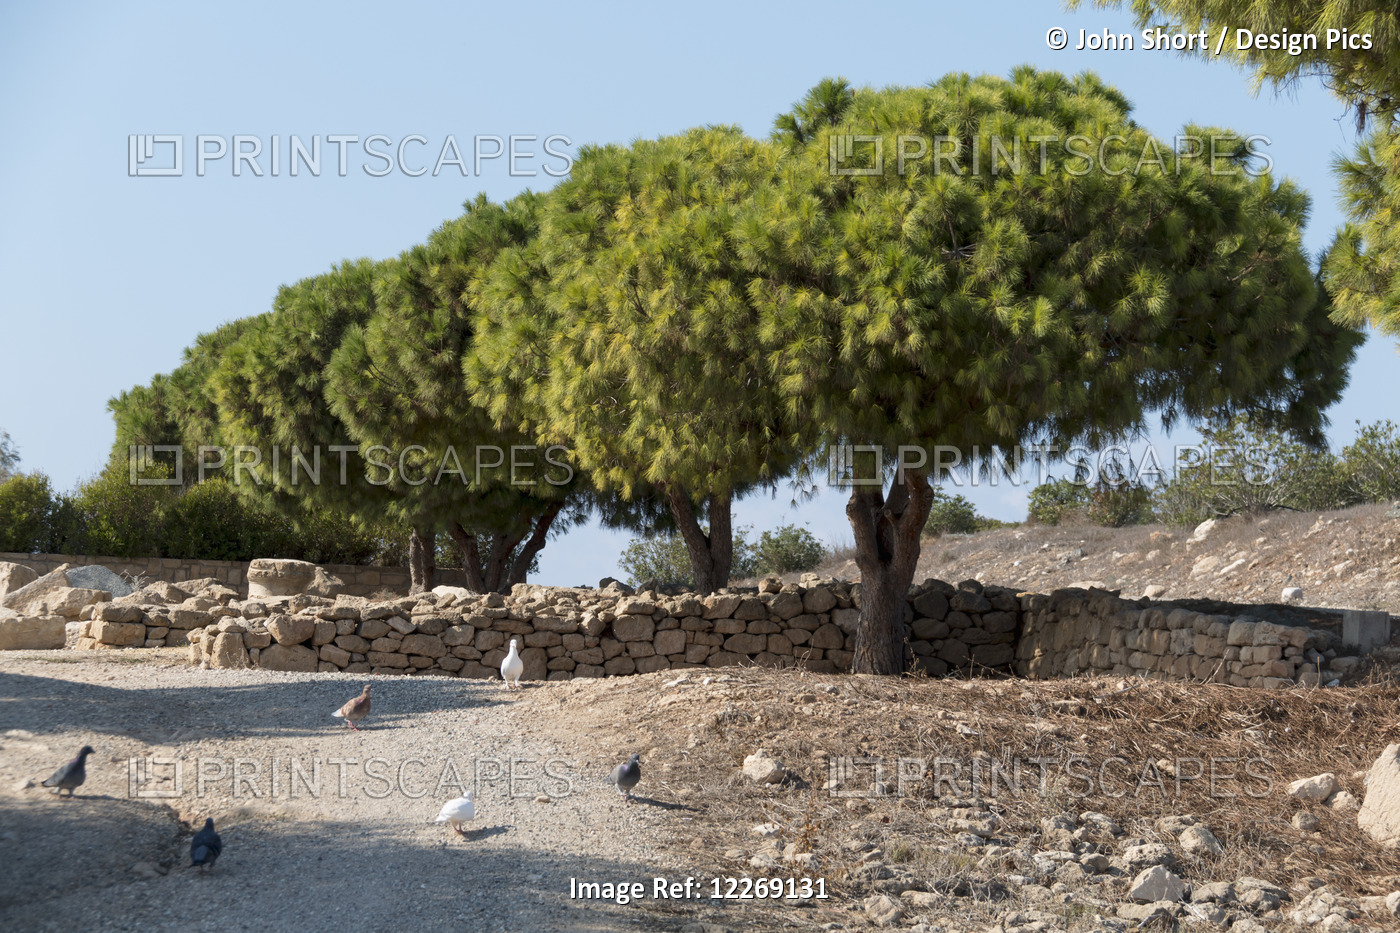 Birds Wander On The Ground Beside A Stone Wall And Trees; Paphos, Cyprus